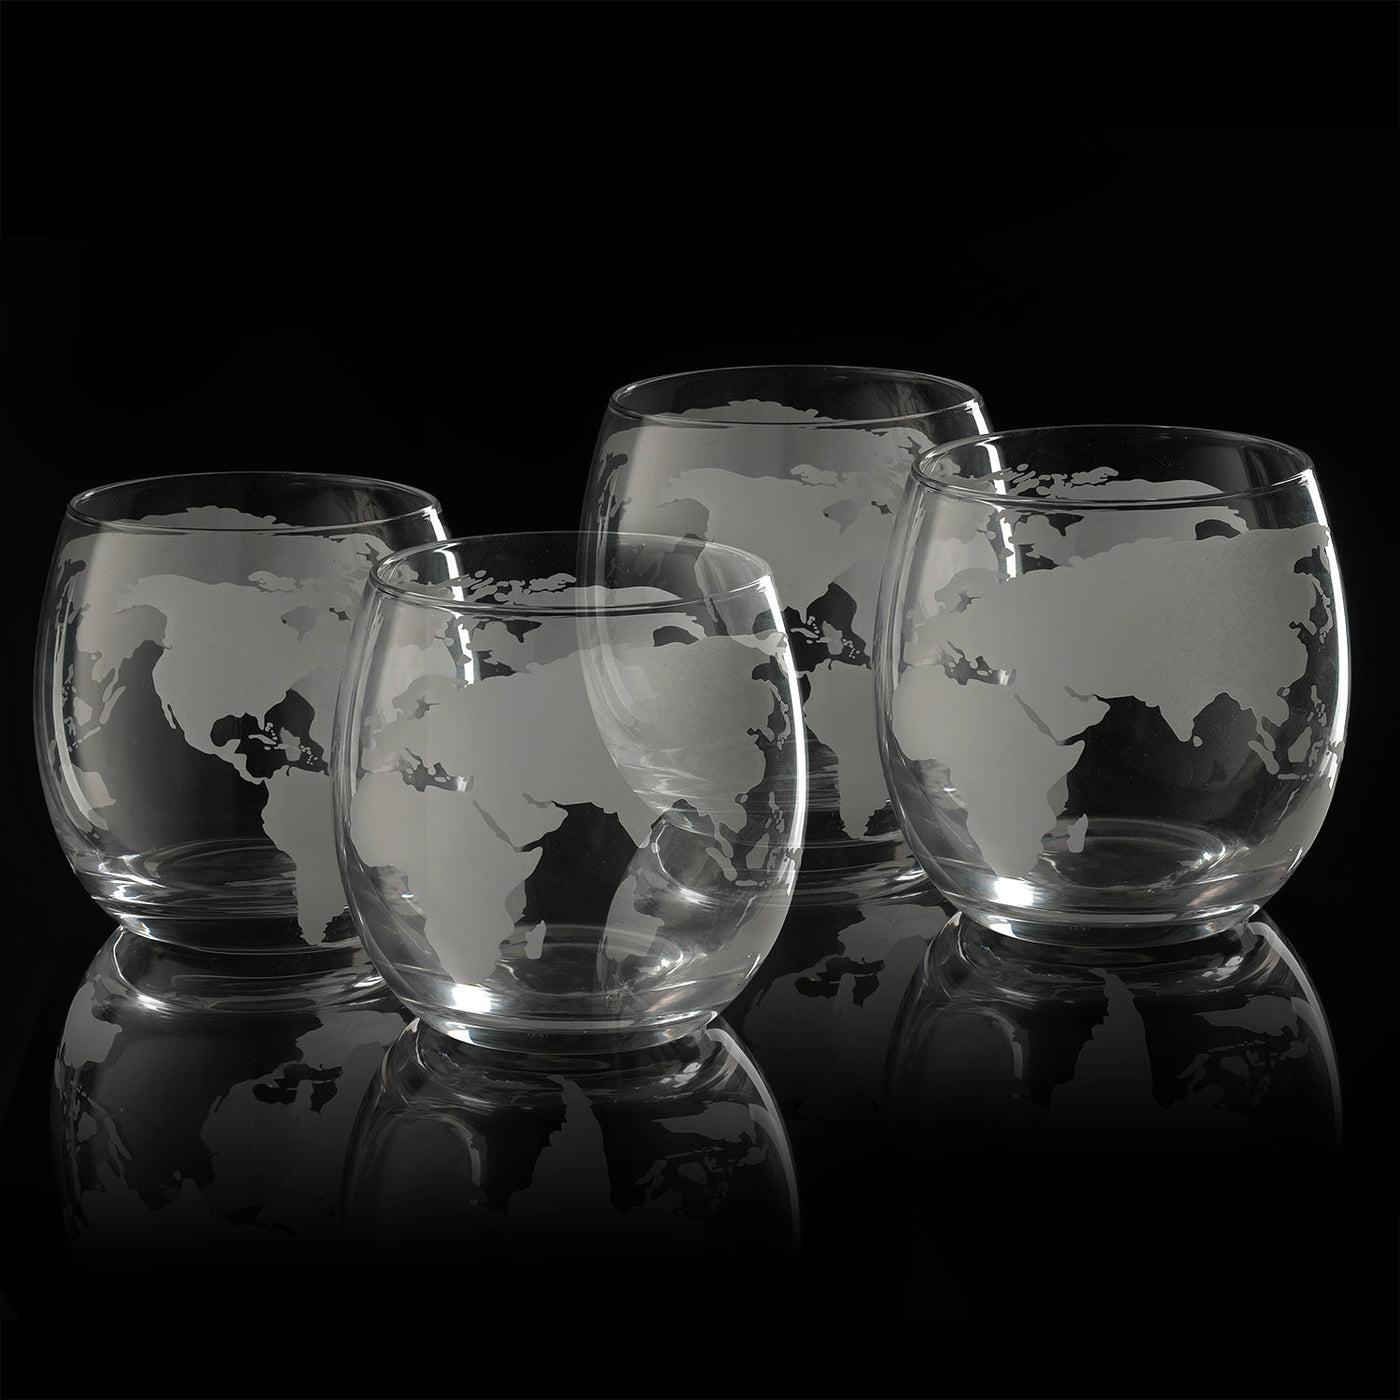 Etched World Globe Glasses 10 oz -Set of 4 by Liquor Lux, Wine, Whiskey, Scotch, Vodka Water or Juice Old Fashion Glasses, World Glasses Etched Globe